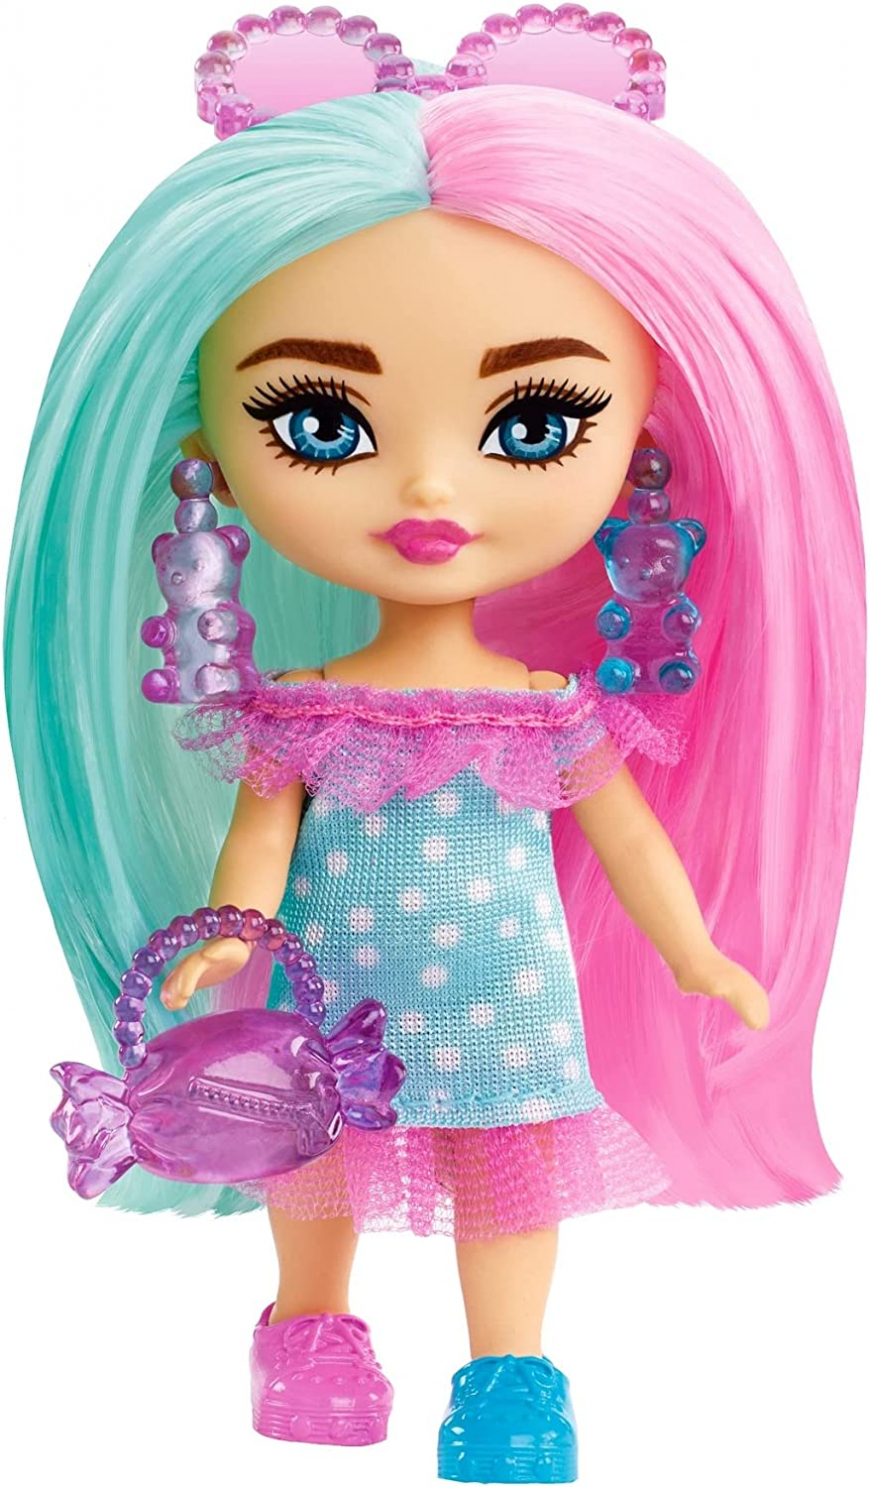 Barbie Extra Mini Minis Doll - Turquoise/Pink Candy